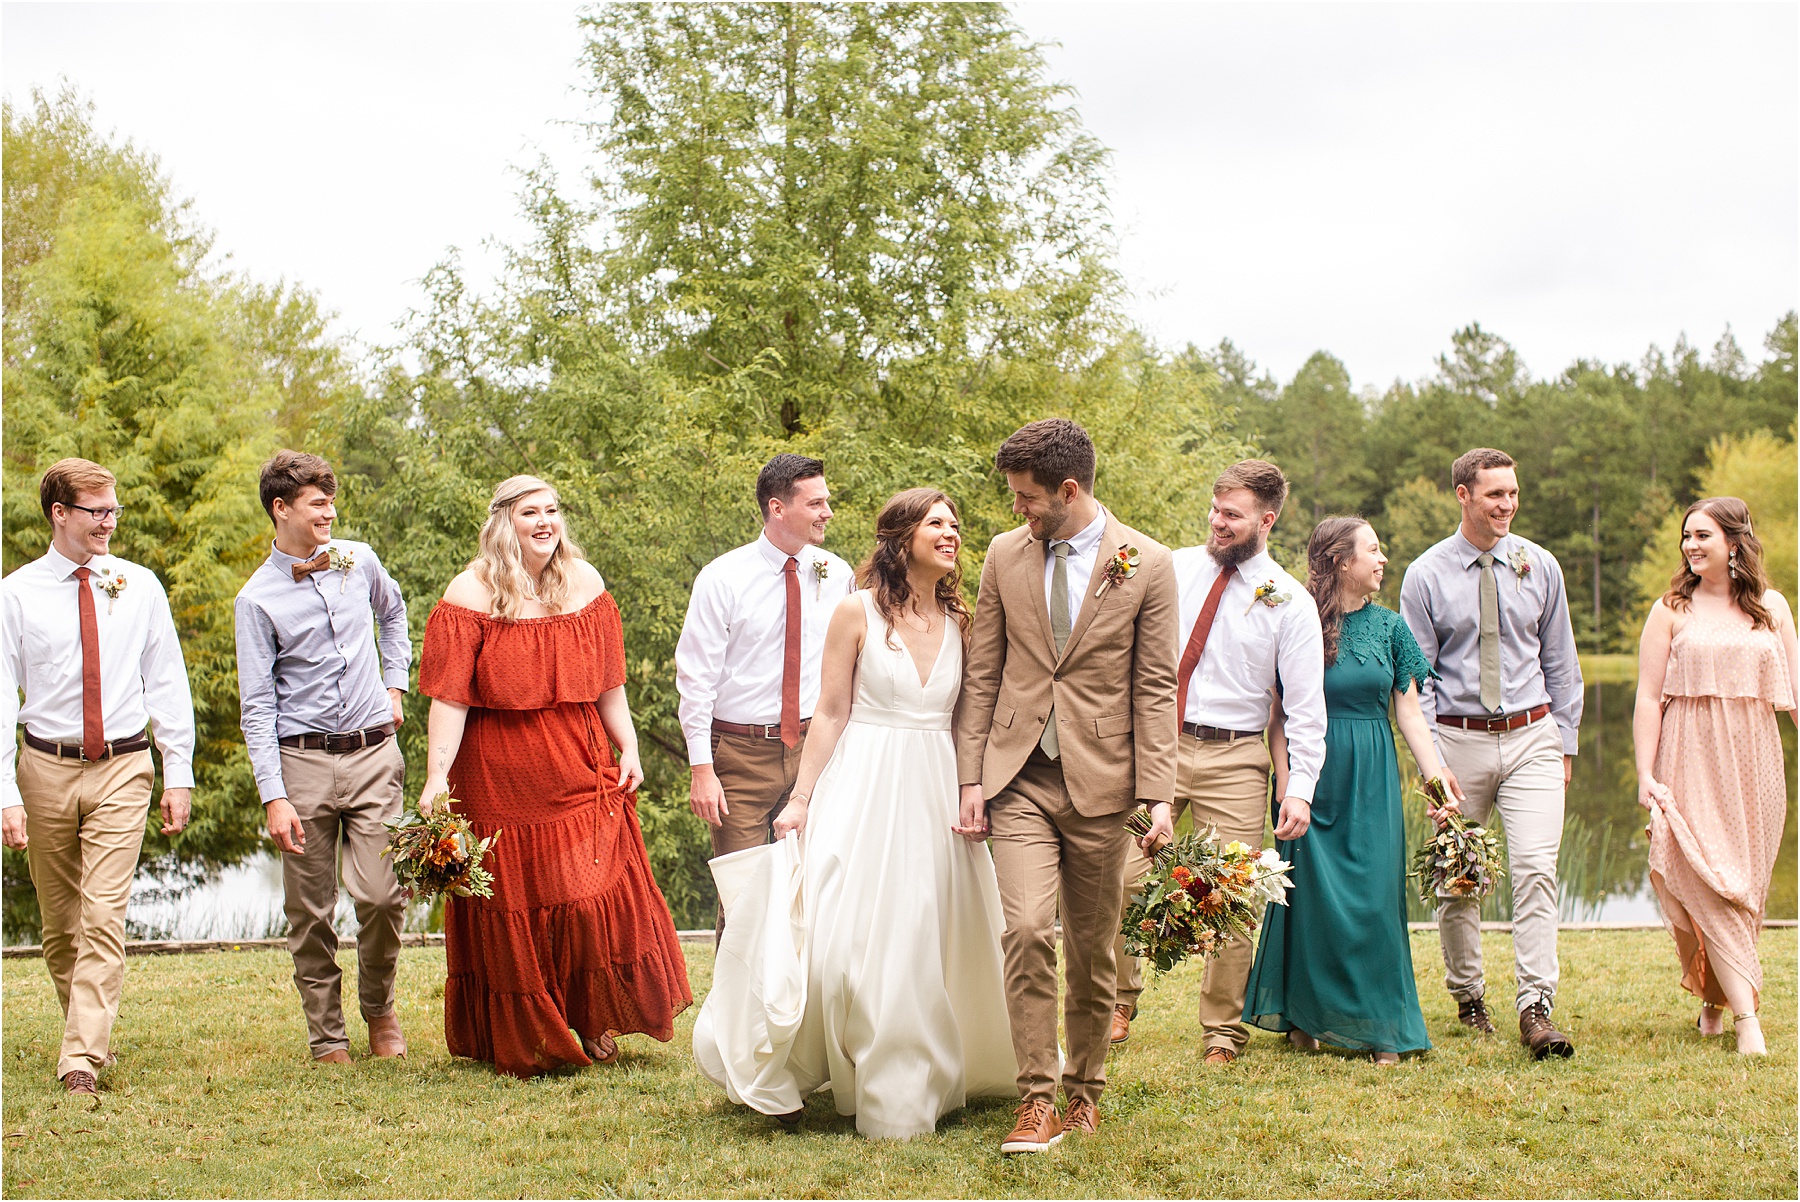 Woman in wedding dress smiles up at her groom in brown suit as they walk together